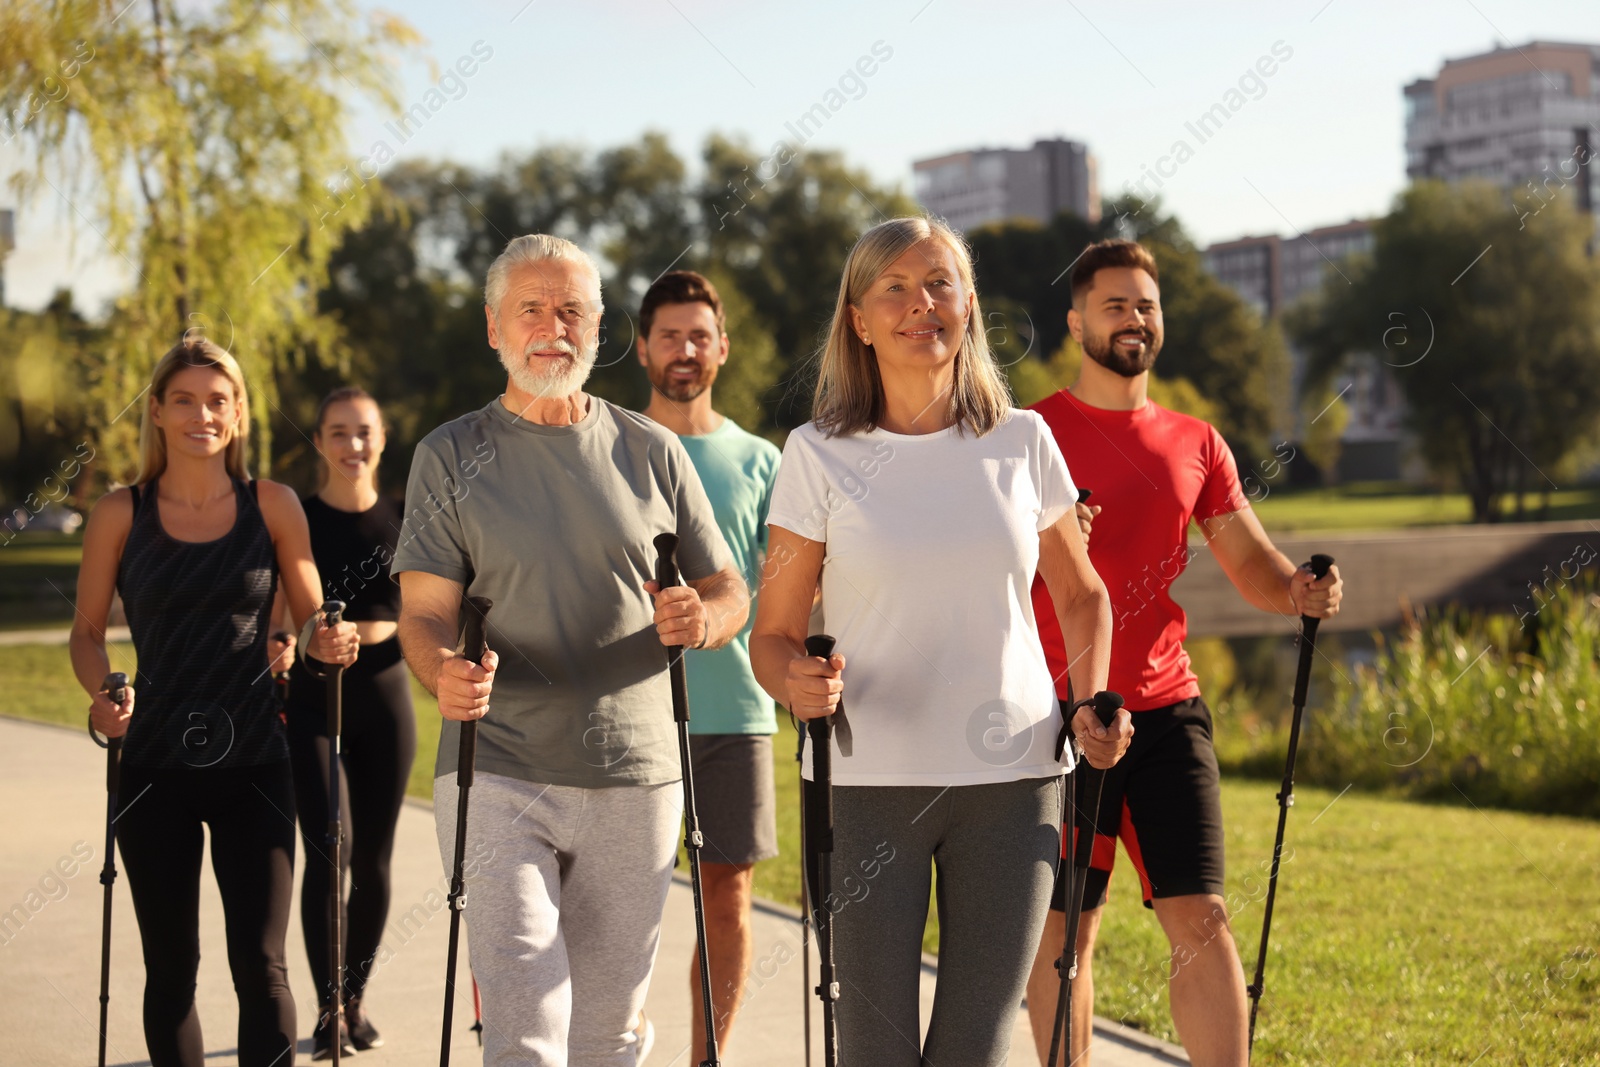 Photo of Group of happy people practicing Nordic walking with poles in park